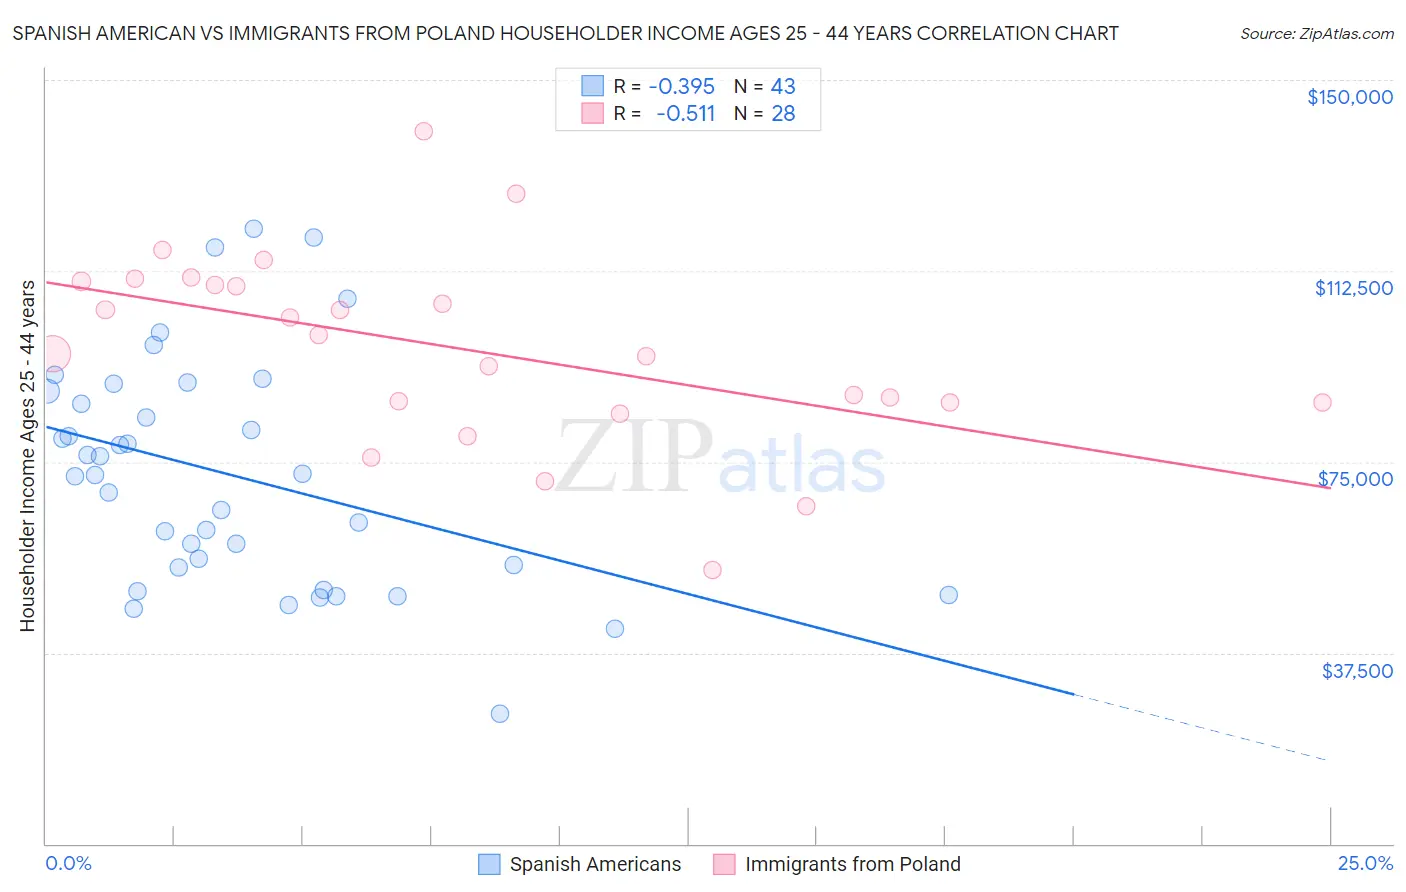 Spanish American vs Immigrants from Poland Householder Income Ages 25 - 44 years